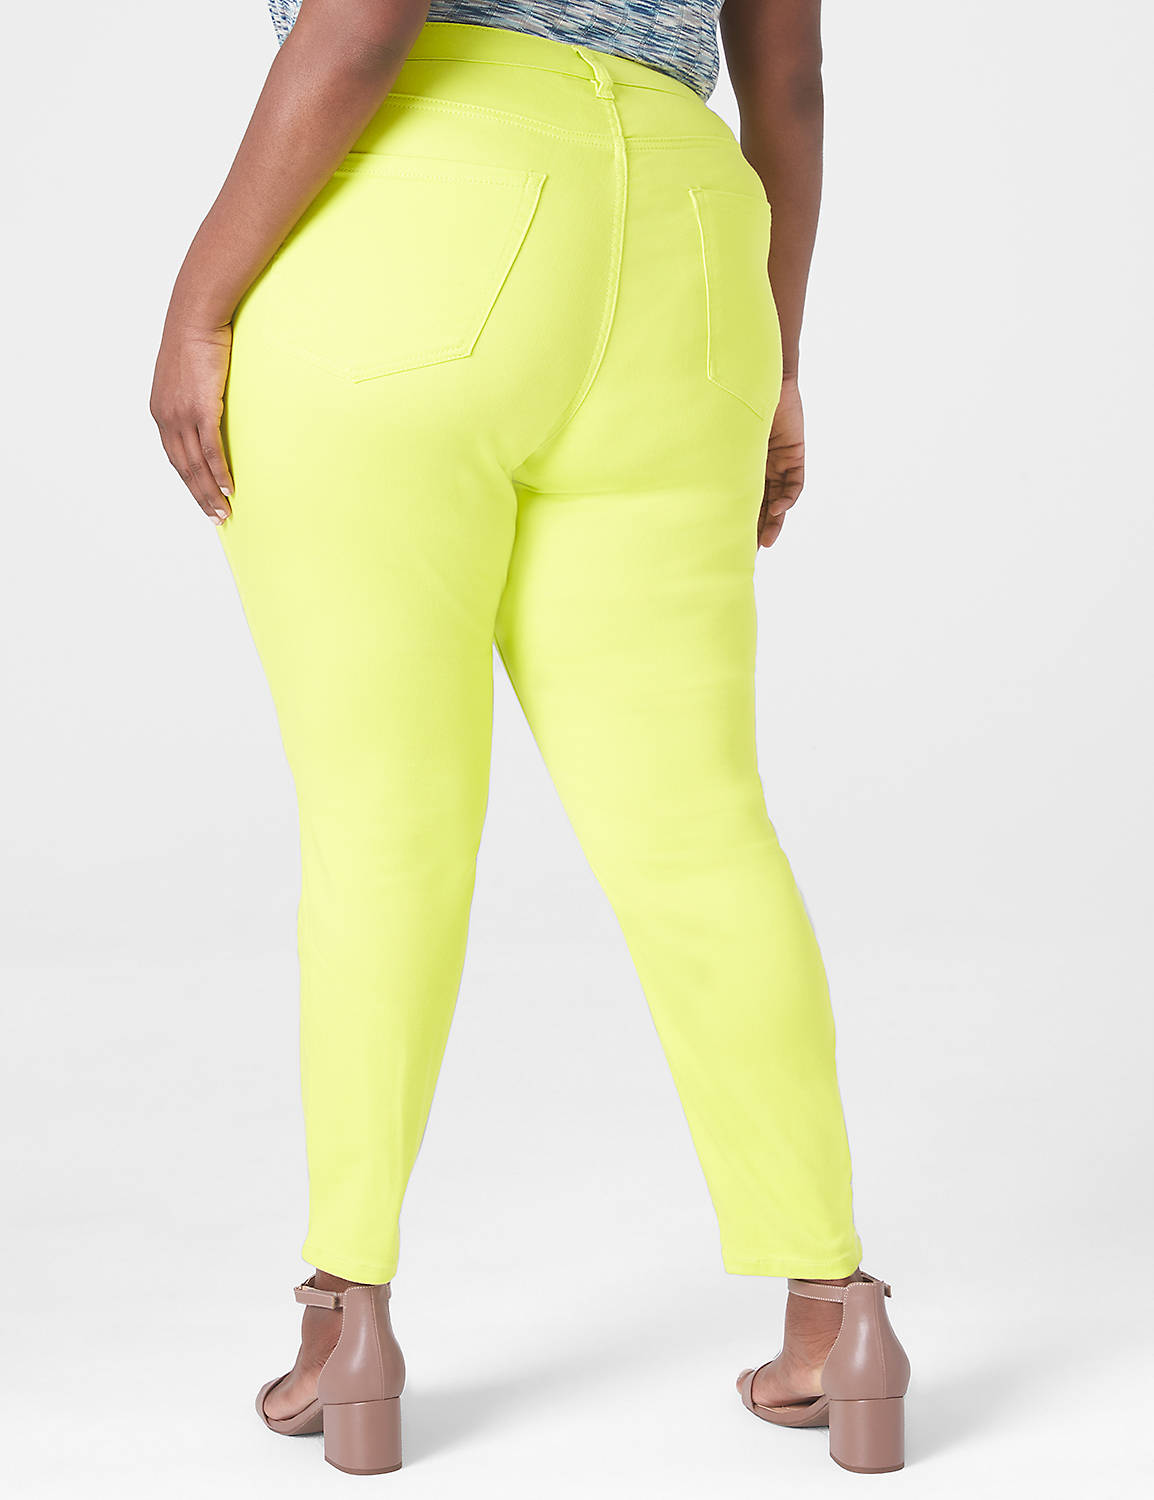 Curvy Fit Sateen Skinny 1127993 Product Image 2